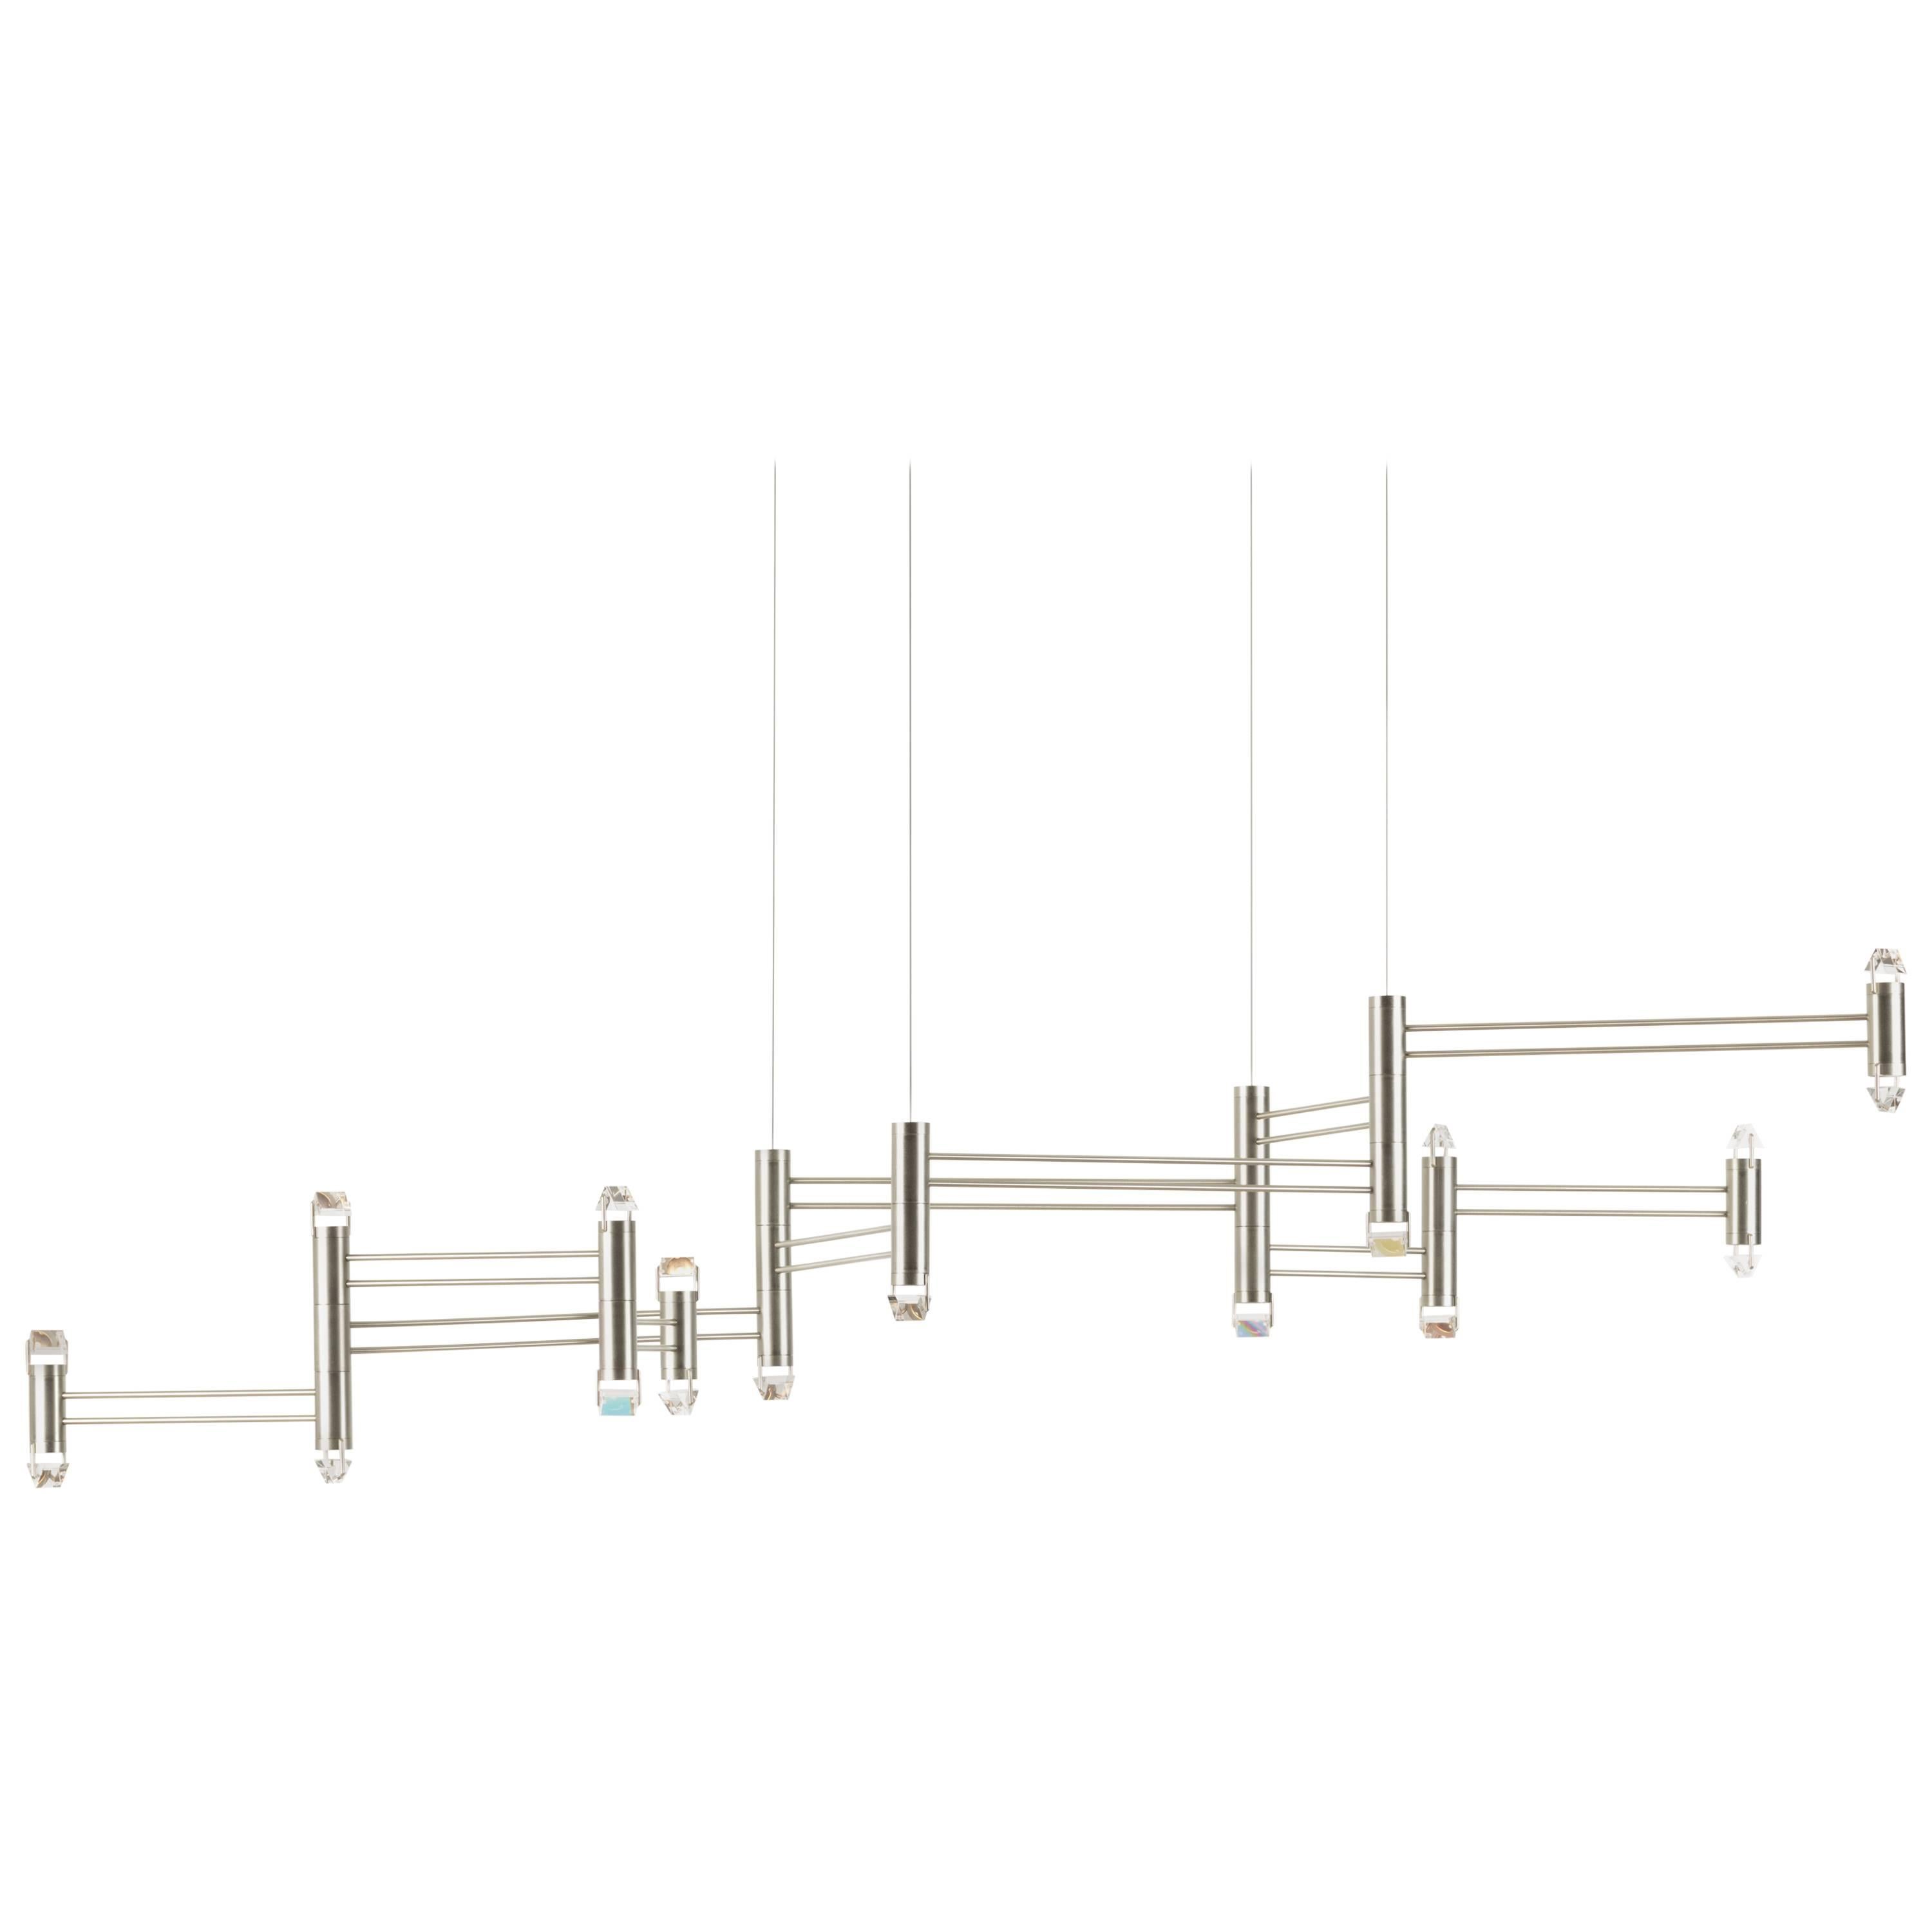 Aries XI.II Chandelier in Polished Nickel with Faceted Glass and LED lights